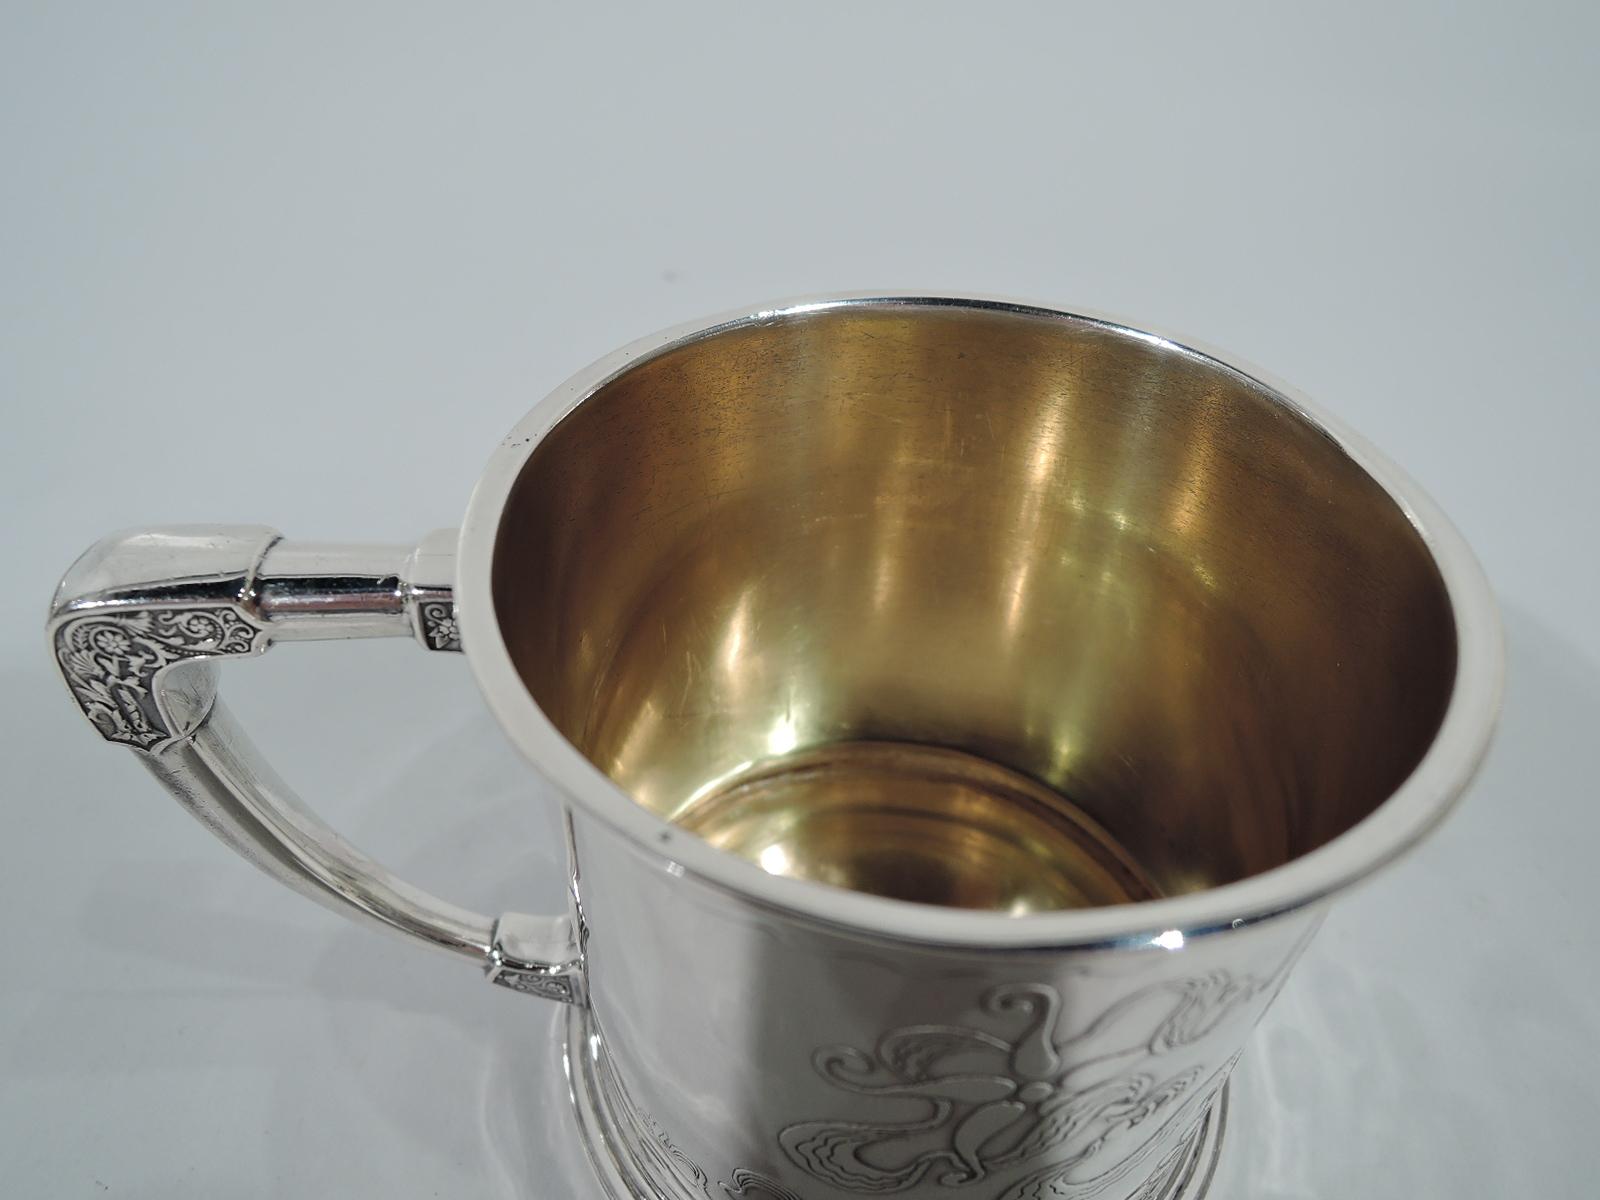 American Stylistically Advanced Art Nouveau Sterling Silver Baby Cup by Whiting